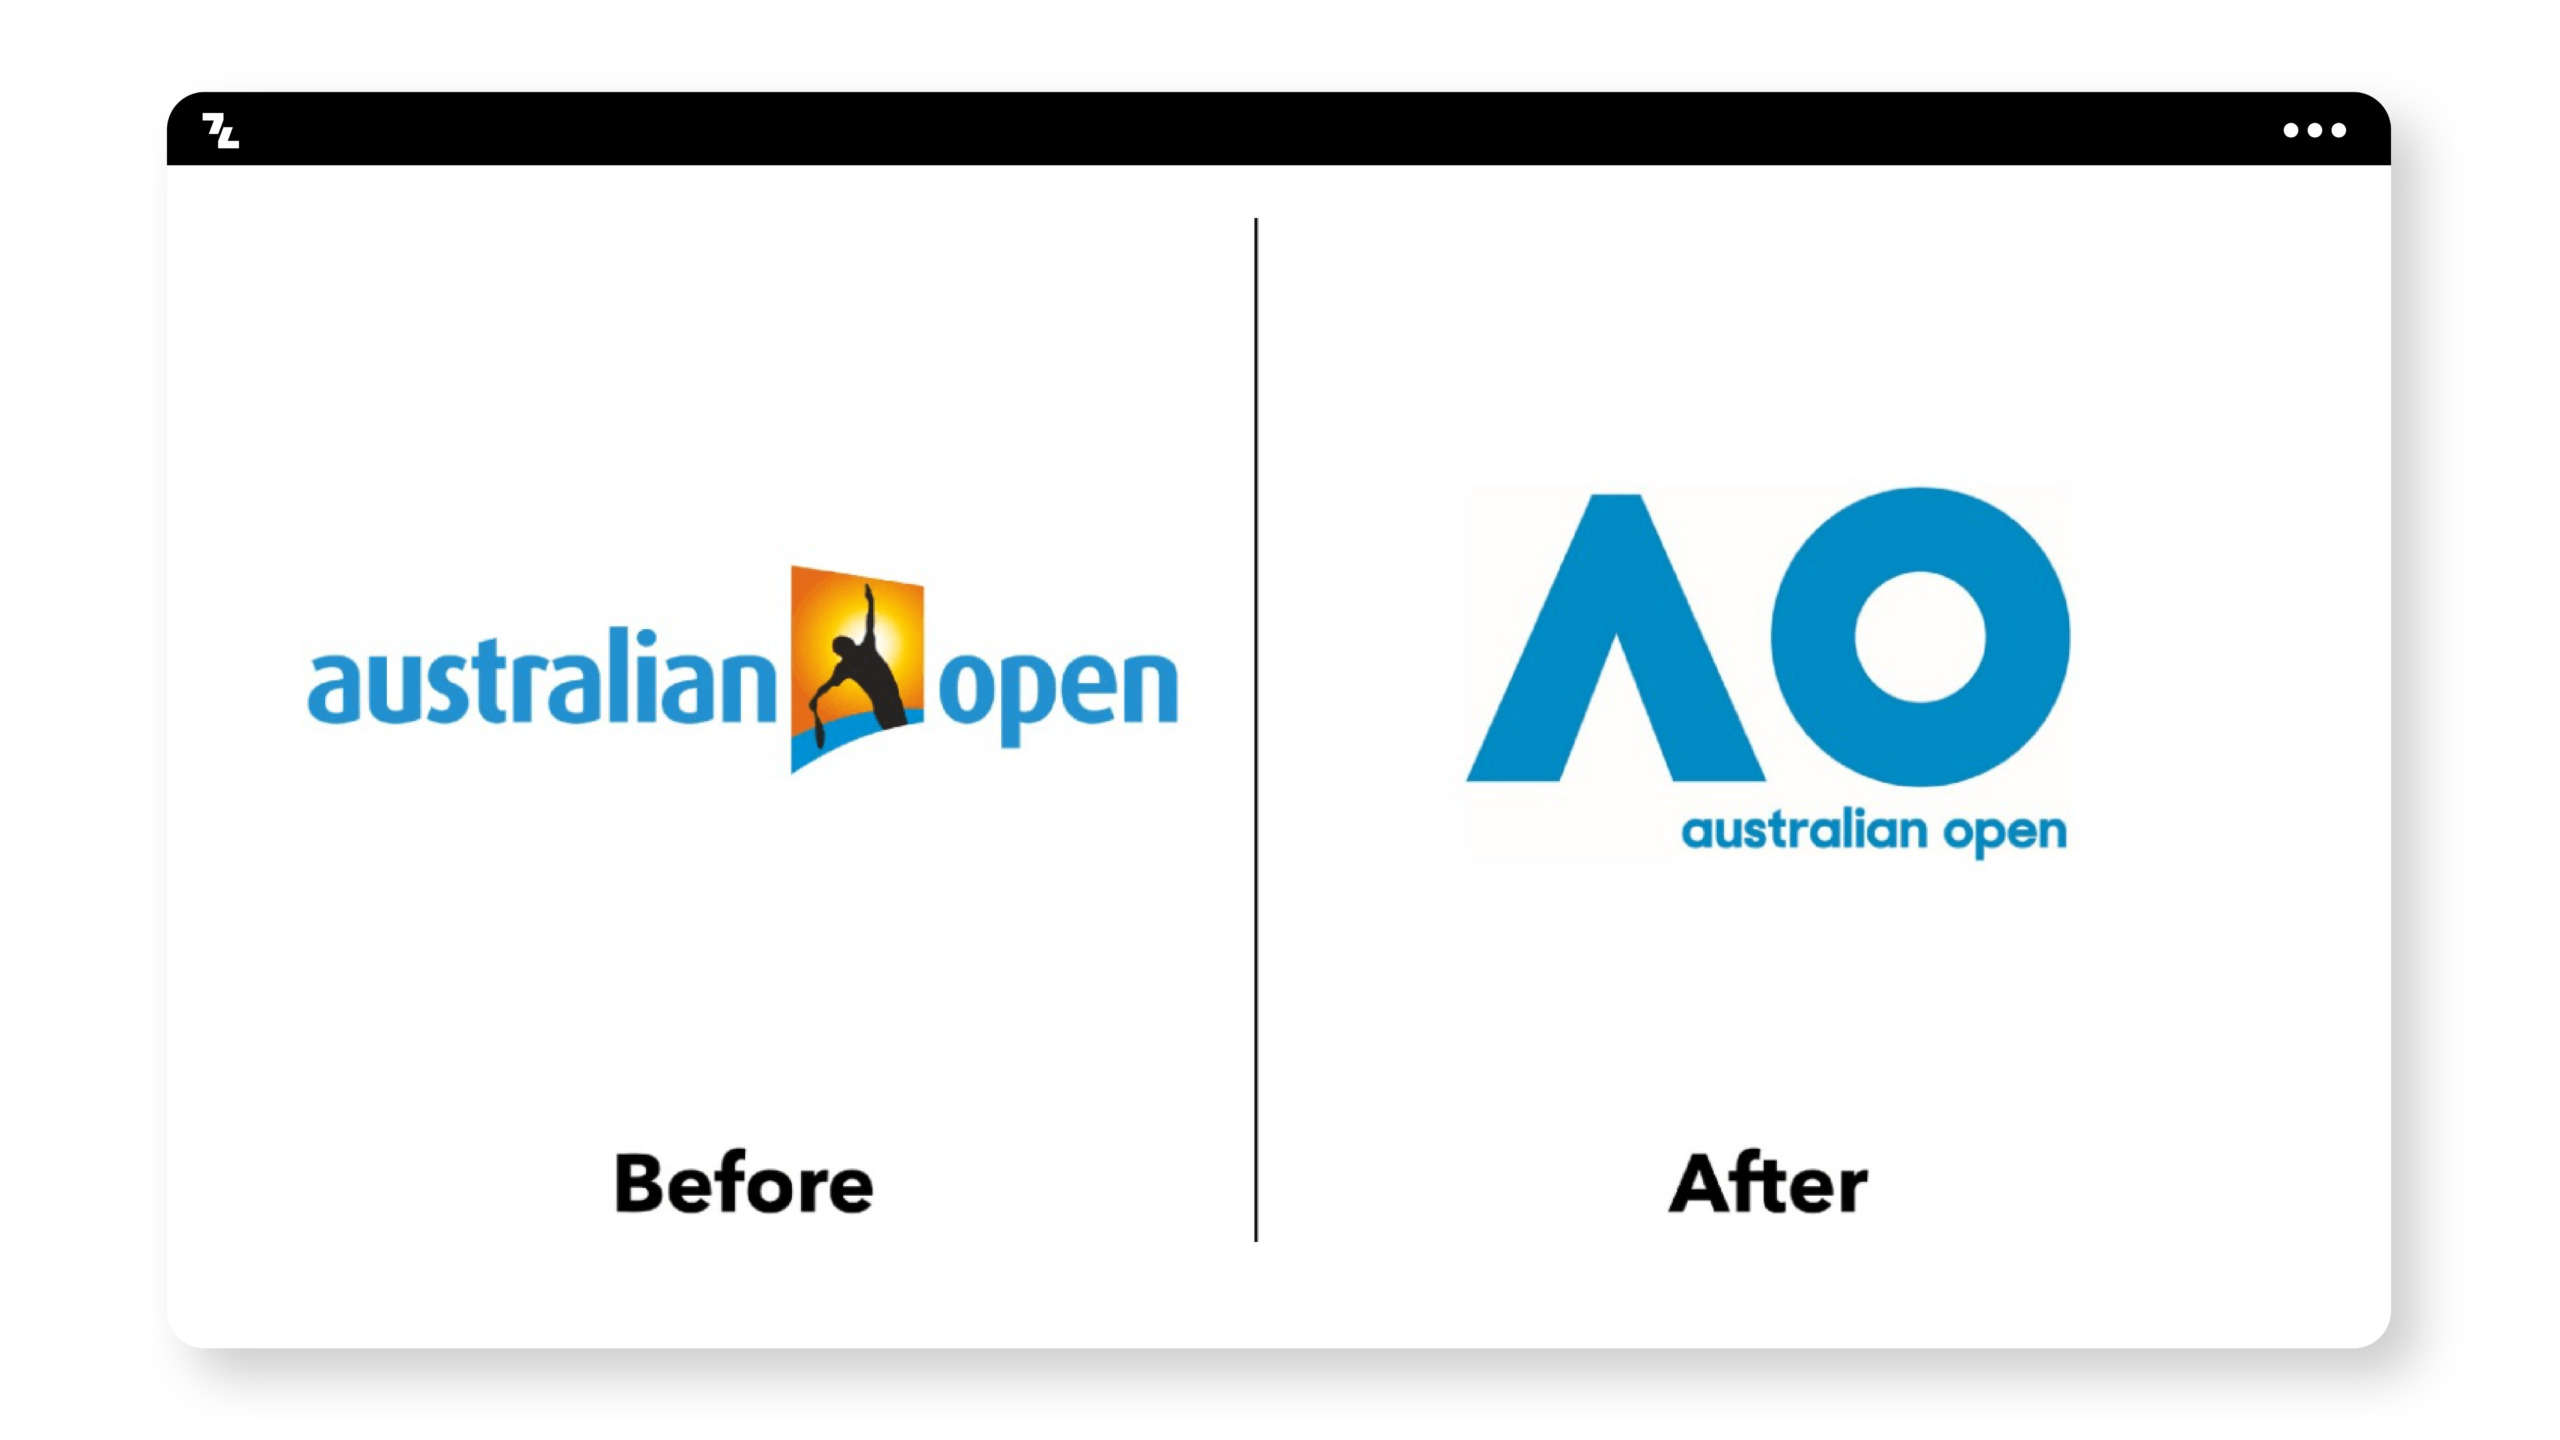 The australian open logo before and after.